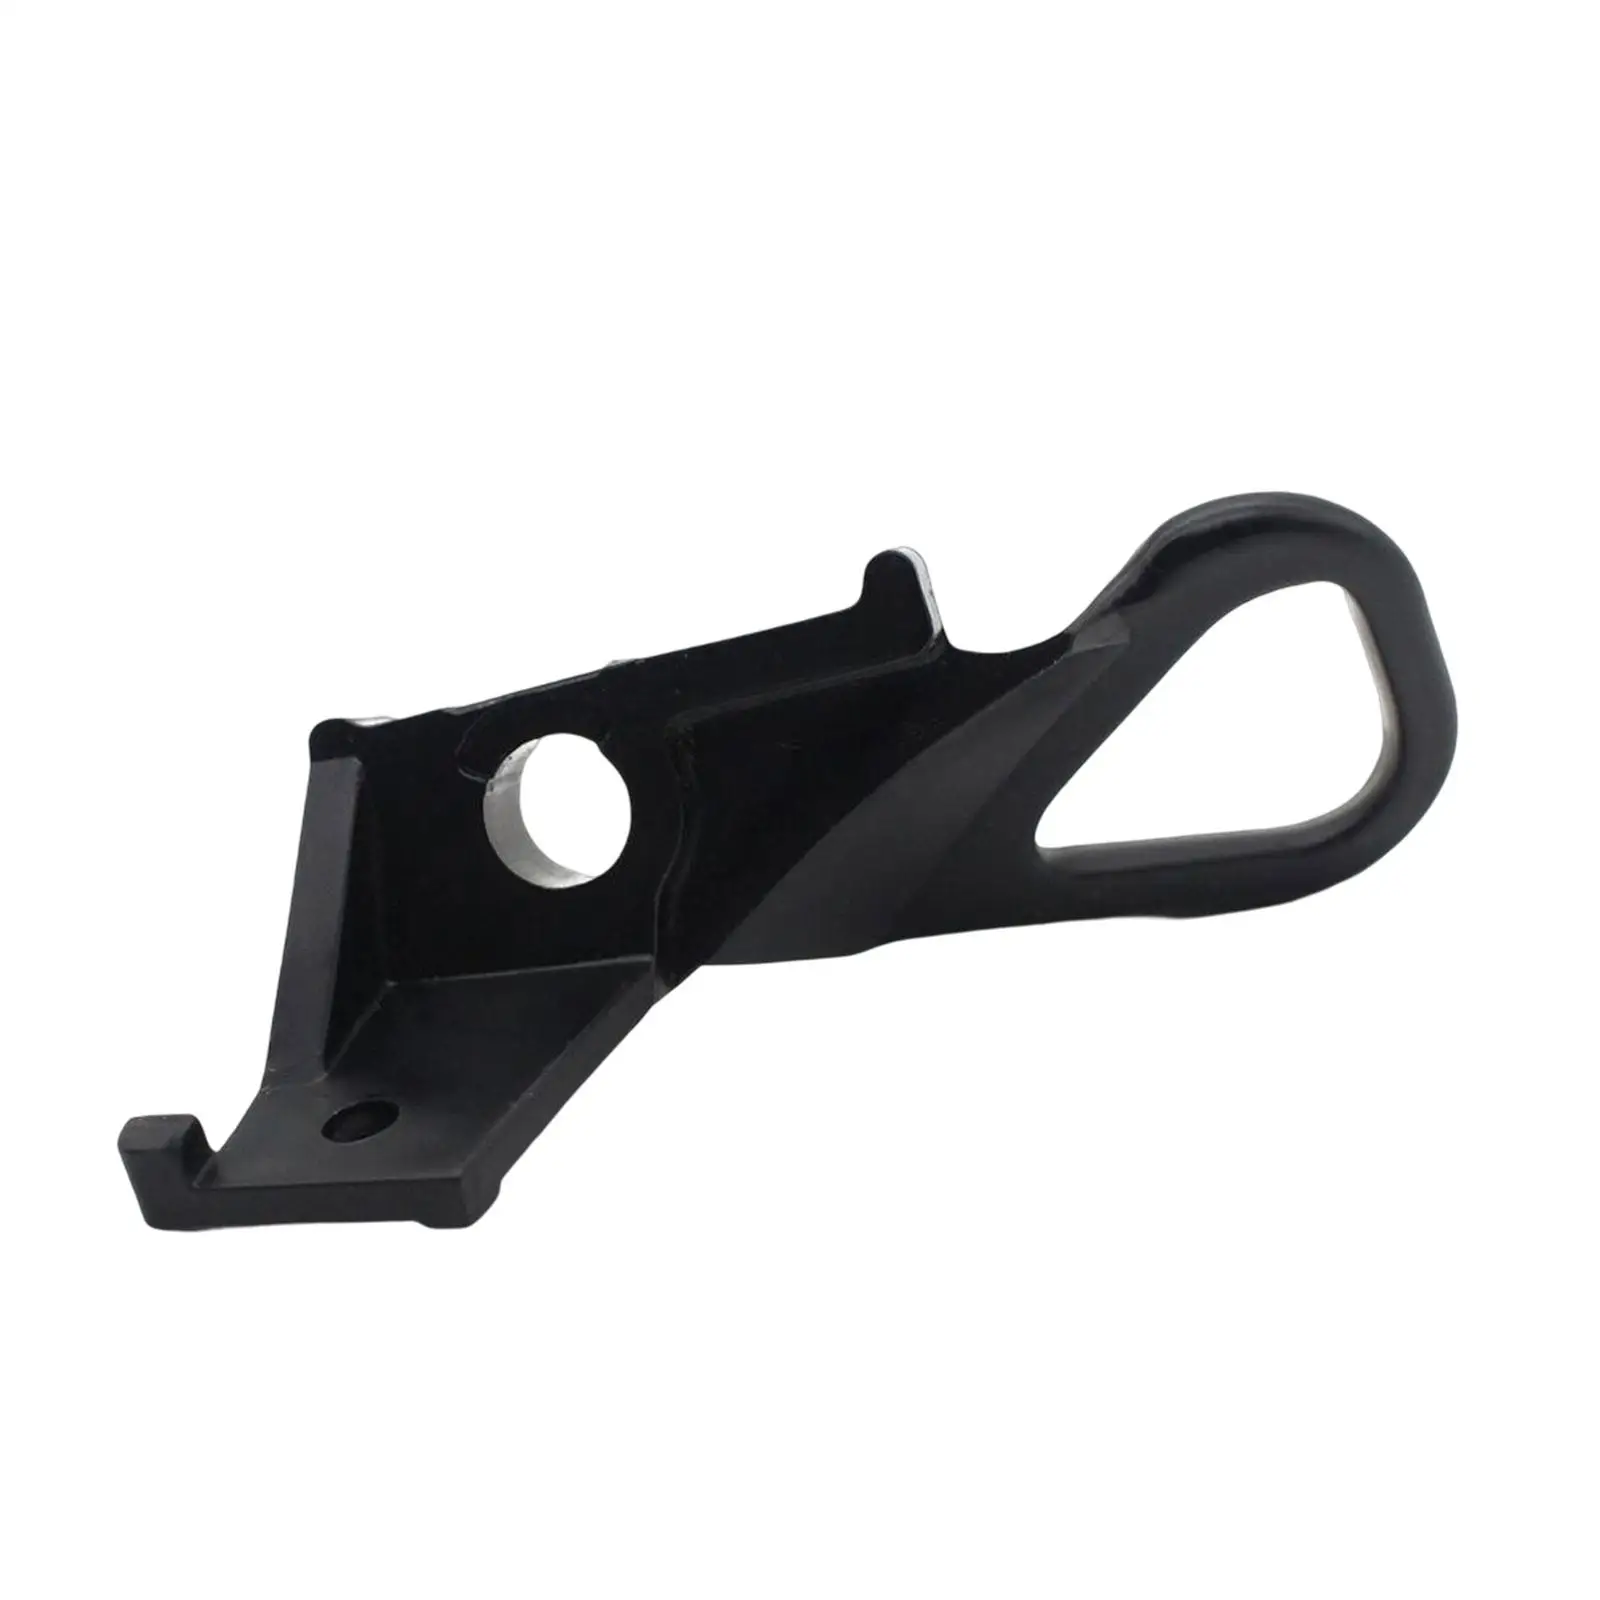 Oil Cup Fixed Bracket Cover Replaces Motorcycle Accessories Spare Parts Aluminum